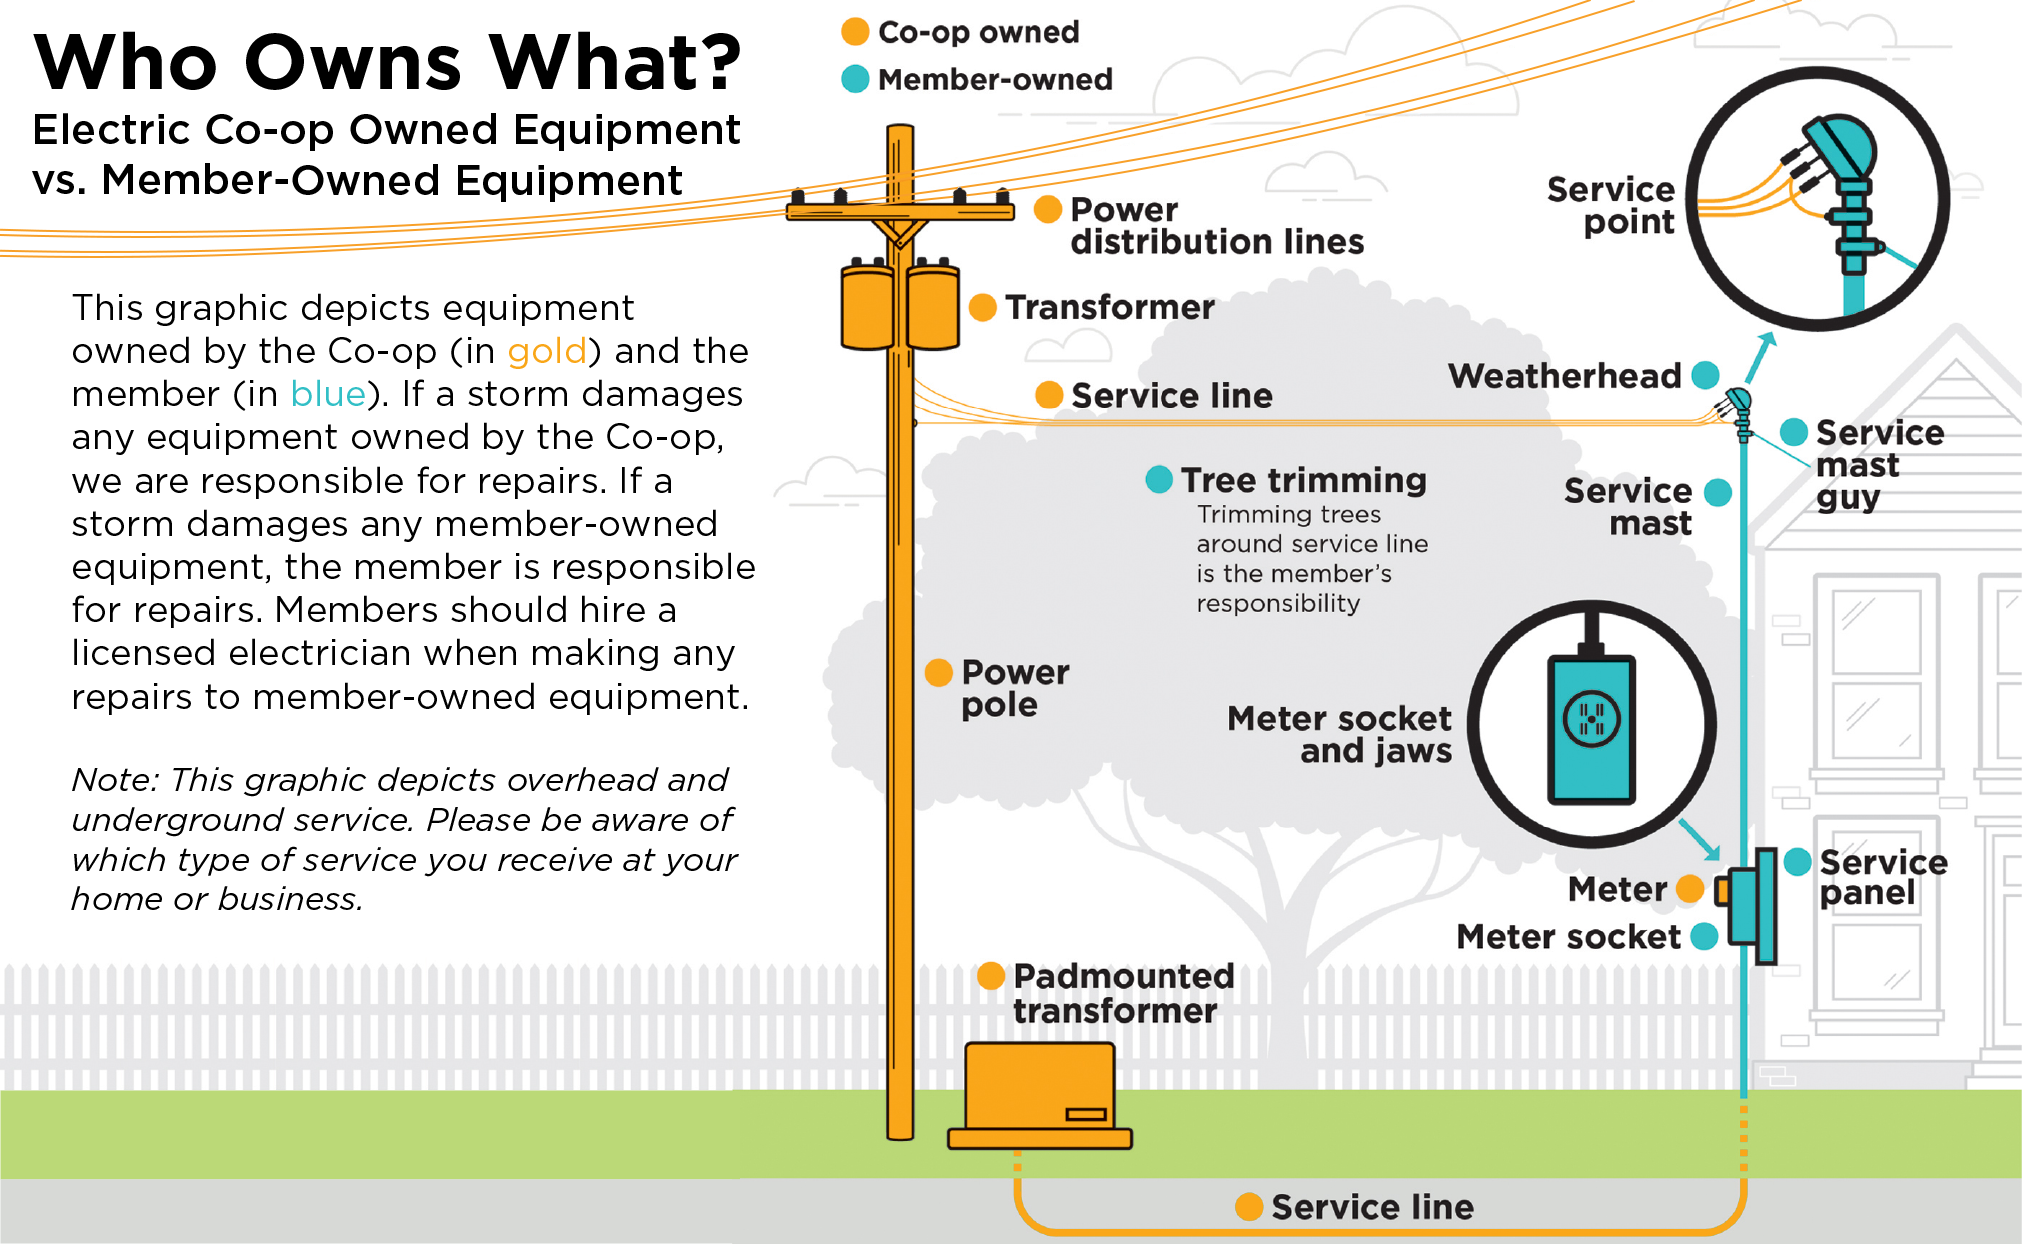 Who Owns What? Electric Co-op Owned Equipment vs. Member-Owned Equipment. This graphic depicts equipment owned by the Co-op (in gold) and the member (in blue). If a storm damages any equipment owned by the Co-op, we are responsible for repairs. If a storm damages any member-owned equipment, the member is responsible for repairs. Members should hire a licensed electrician when making any repairs to member-owned equipment. Note: This graphic depicts overhead and underground service. Please be aware of which type of service you receive at your home or business. Co-op Owned: Power distribution lines, Transformer, Service line, Power pole, Padmounted transformer, Service line, Meter. Member-owned: Service point, Service mast guy, Service mast, Tree trimming, Meter socket and jaws, Service panel, Meter socket.